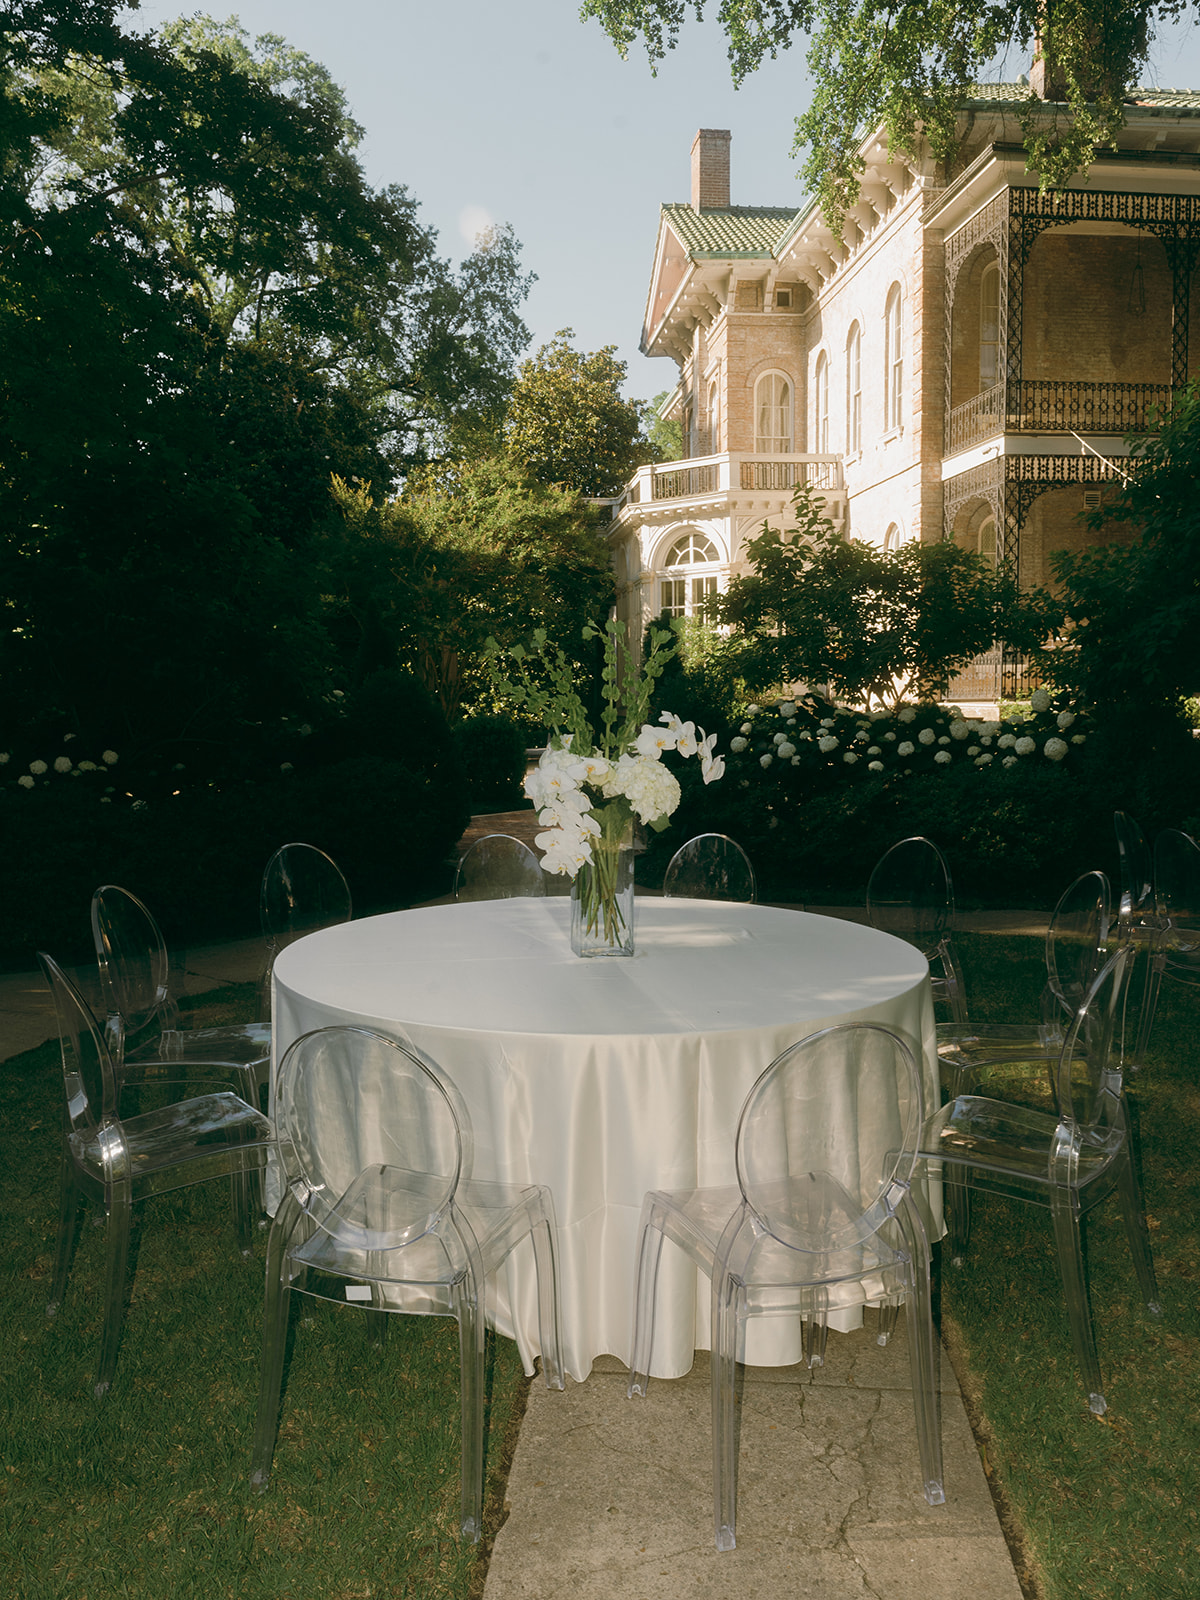 A conventional wedding shot with editorial flair captured by Taylor English Photography at Annesdale Mansion in Memphis